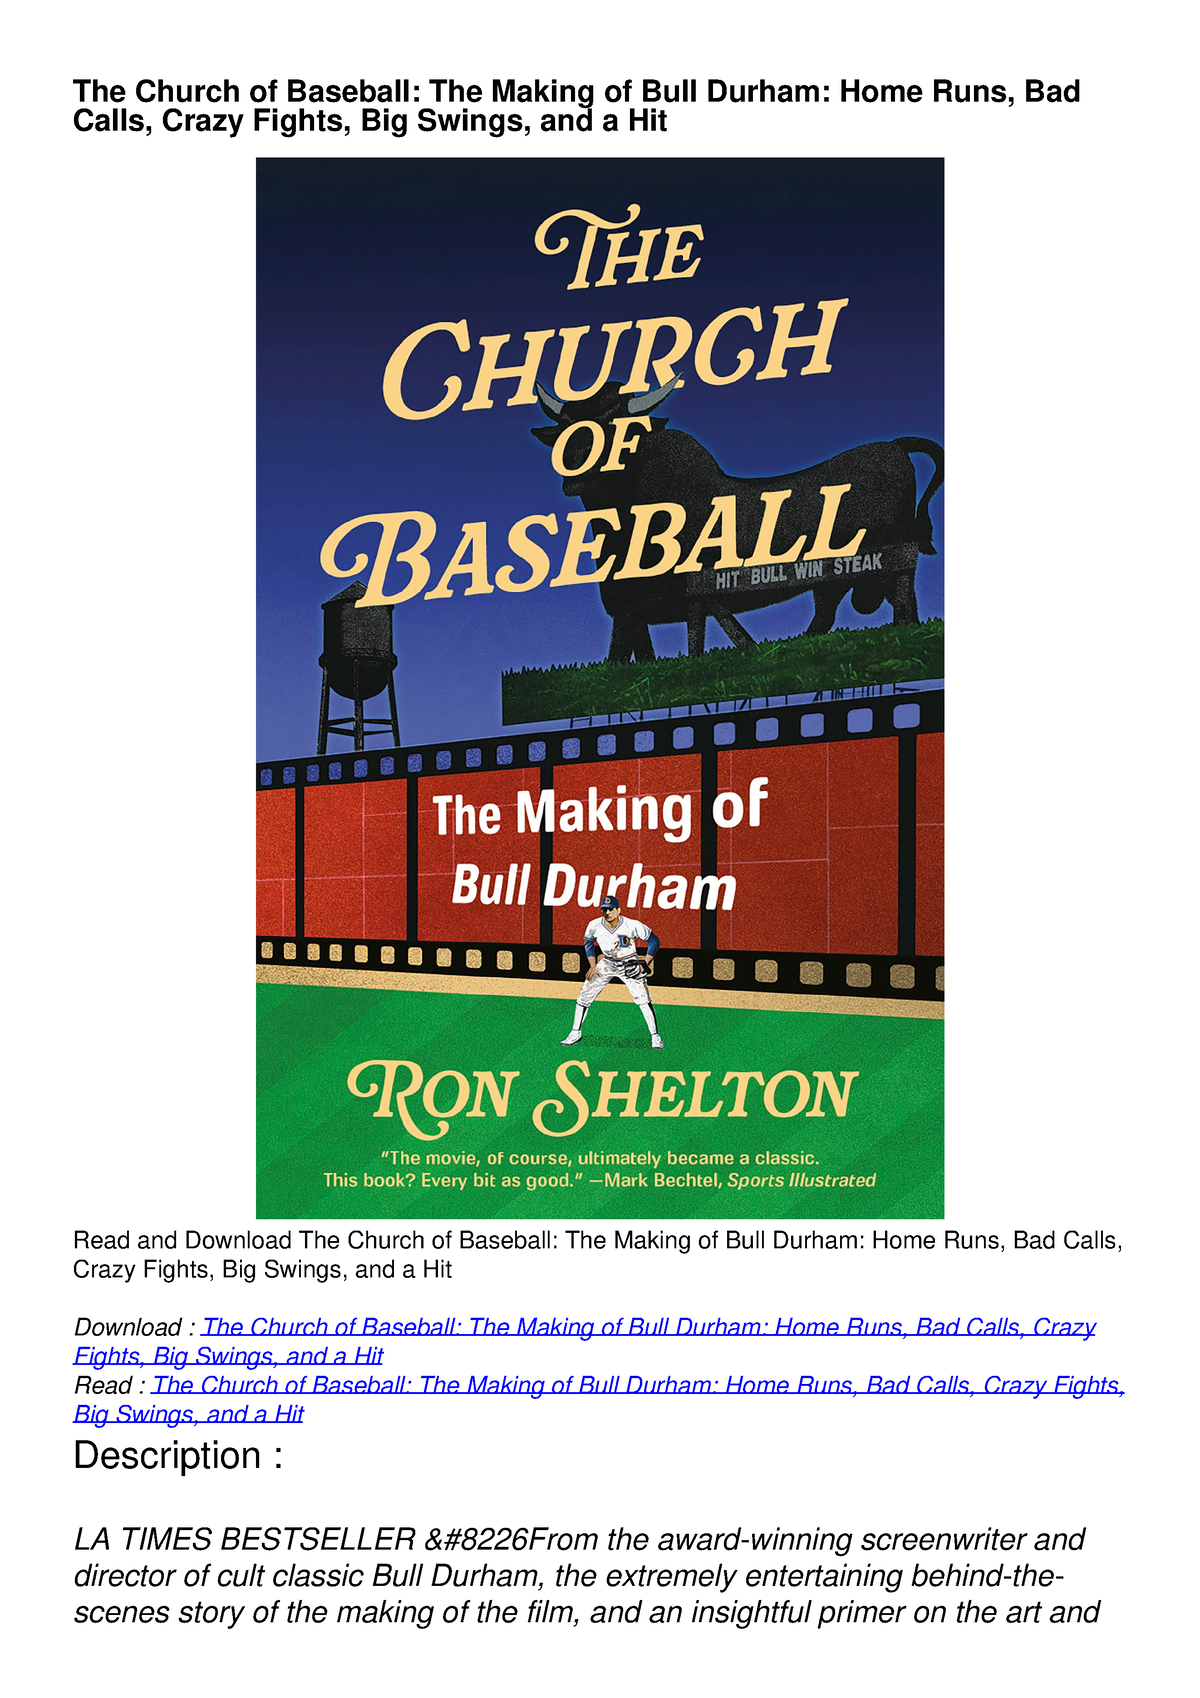 The Church of Baseball: The Making of Bull Durham; Home Runs, Bad Calls,  Crazy Fights, Big Swings, and a Hit